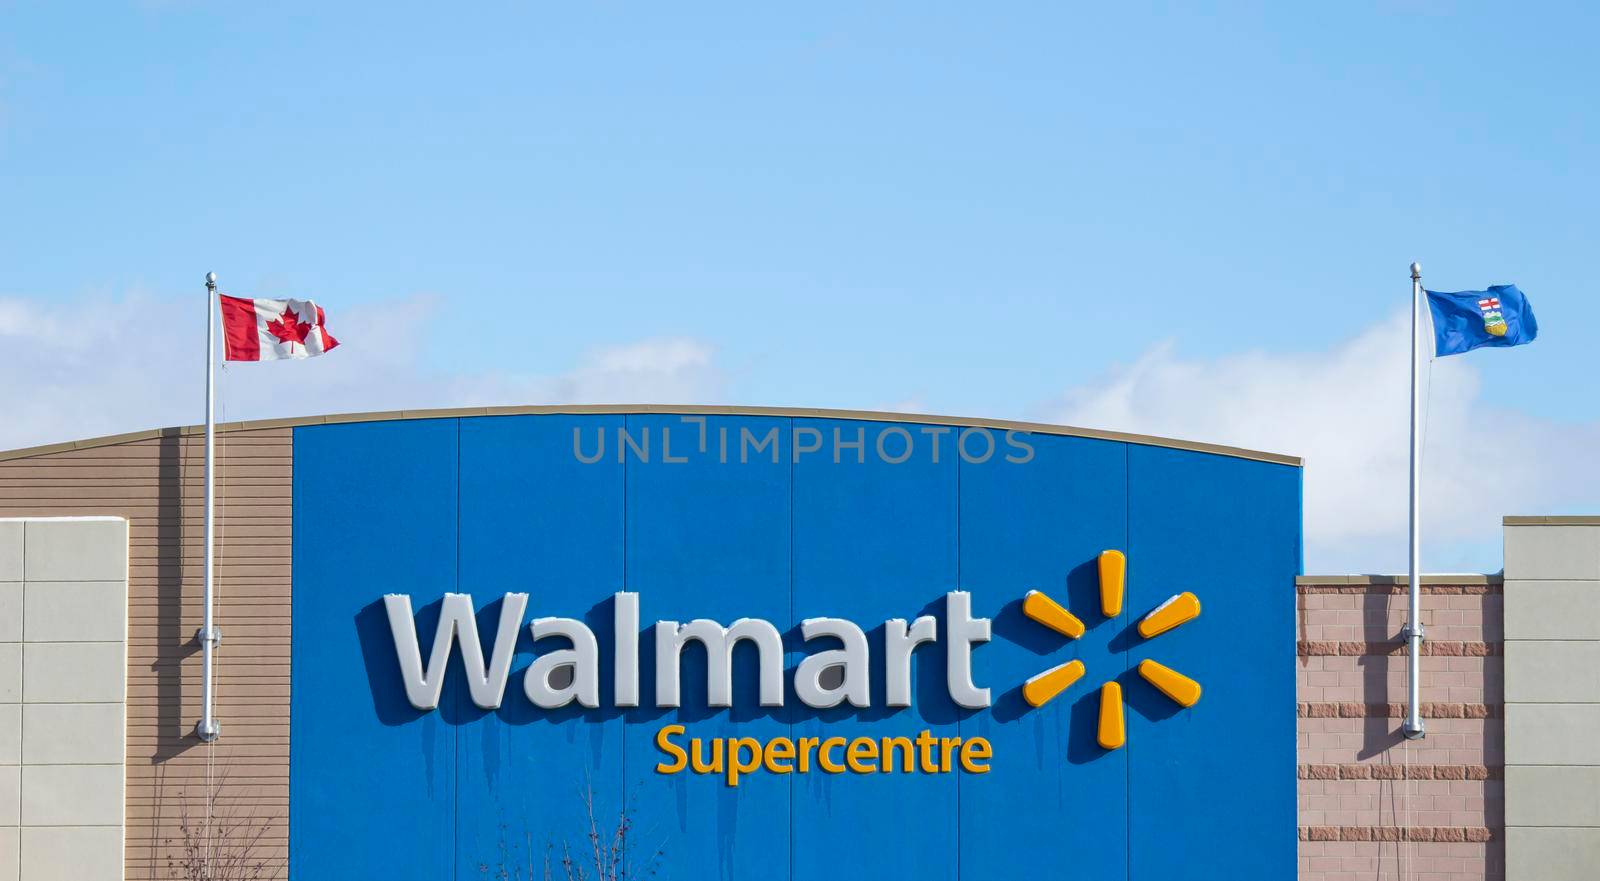 Calgary Alberta, Canada. Oct 17, 2020. Walmart an American multinational retail that operates a chain of hypermarkets, discount department stores, and grocery stores, from in Bentonville, Arkansas.